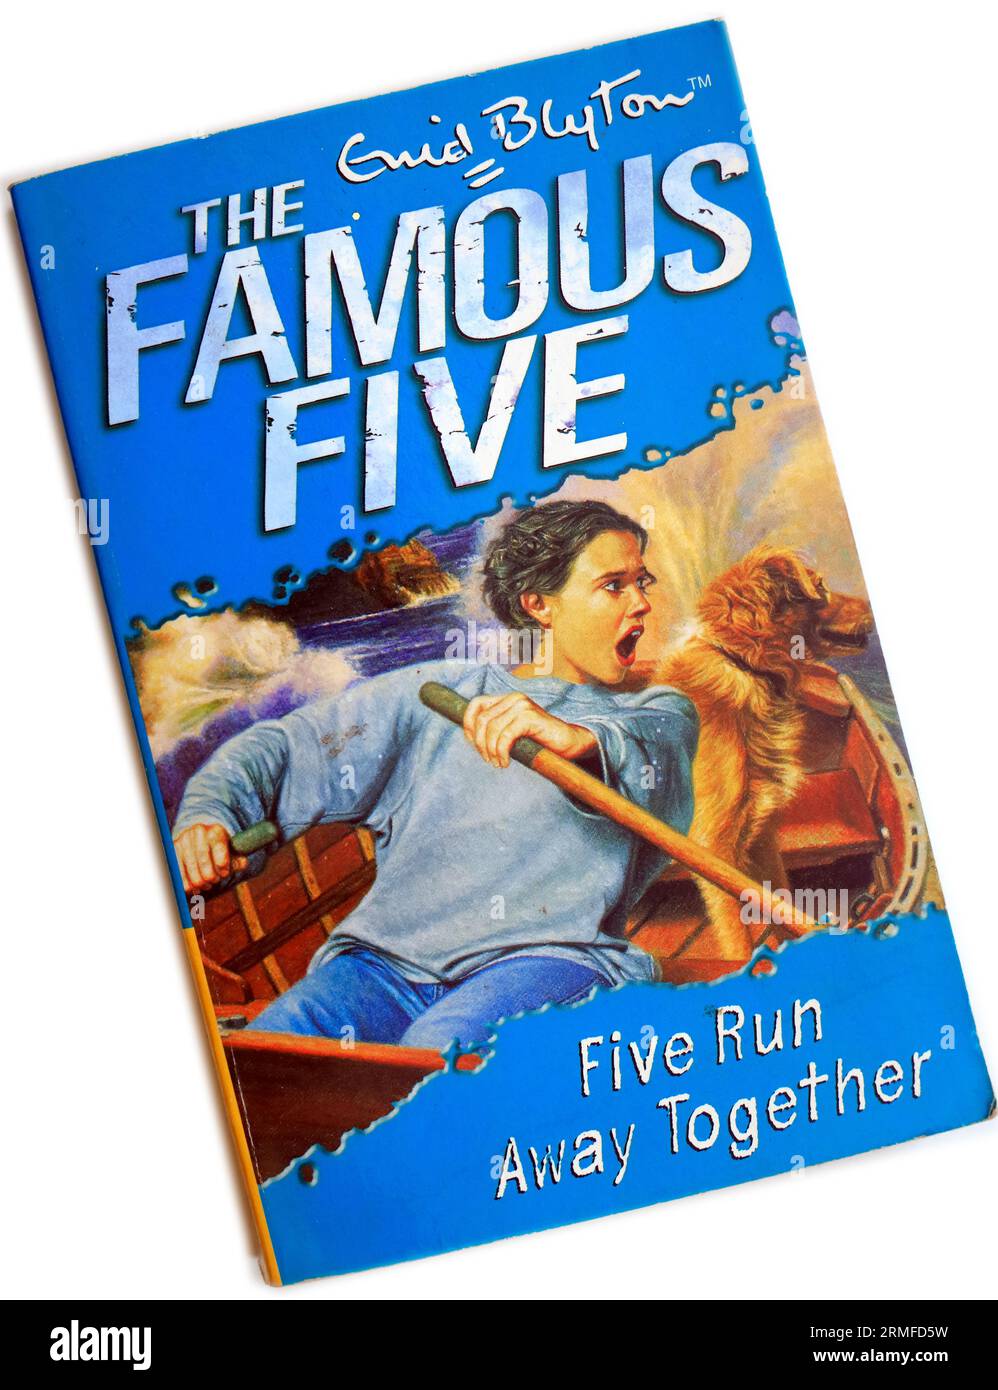 Enid Blyton - The Famous Five - Five Run Away Together. Paperback book cover on white background Stock Photo